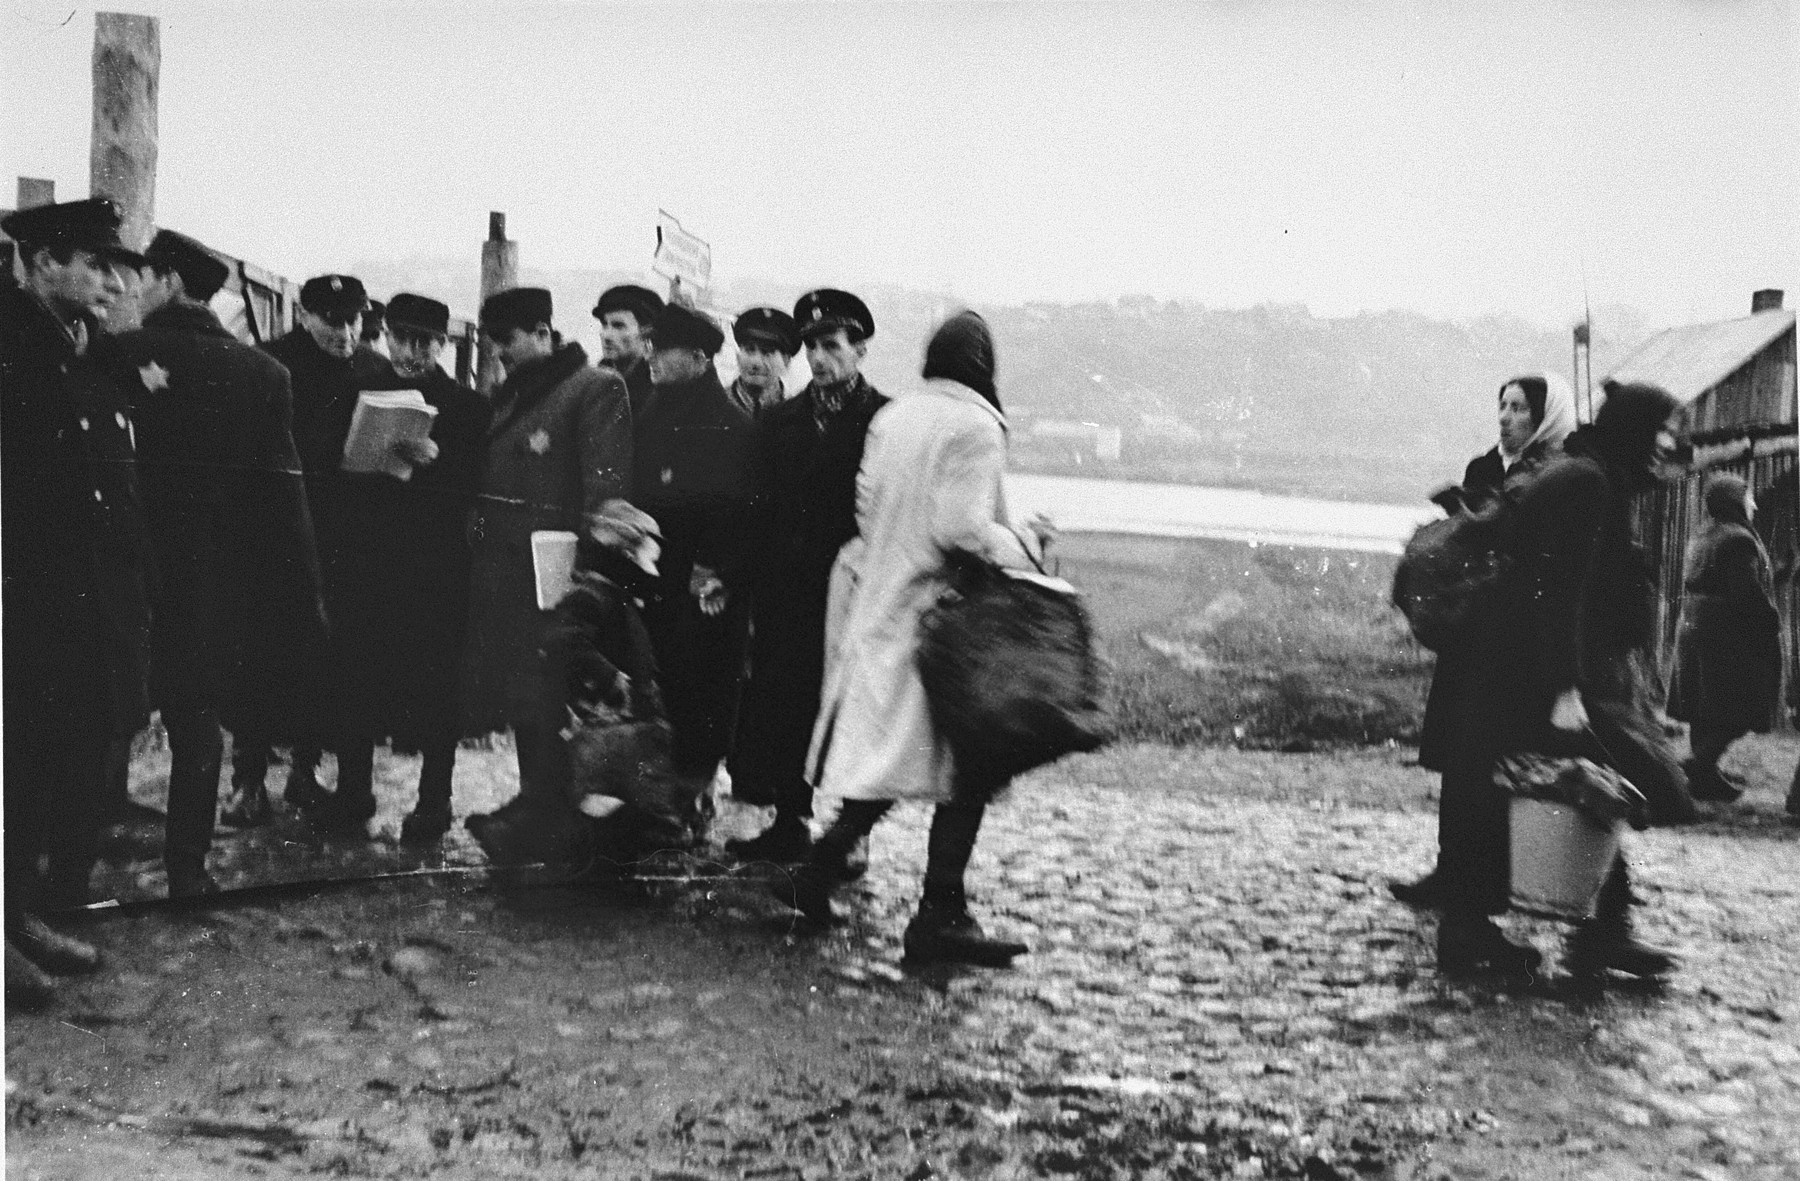 Jewish police gathering at the main gate to the ghetto. Standing first on the left is Avrasha Stupel, who played the violin with the Kovno ghetto orchestra.